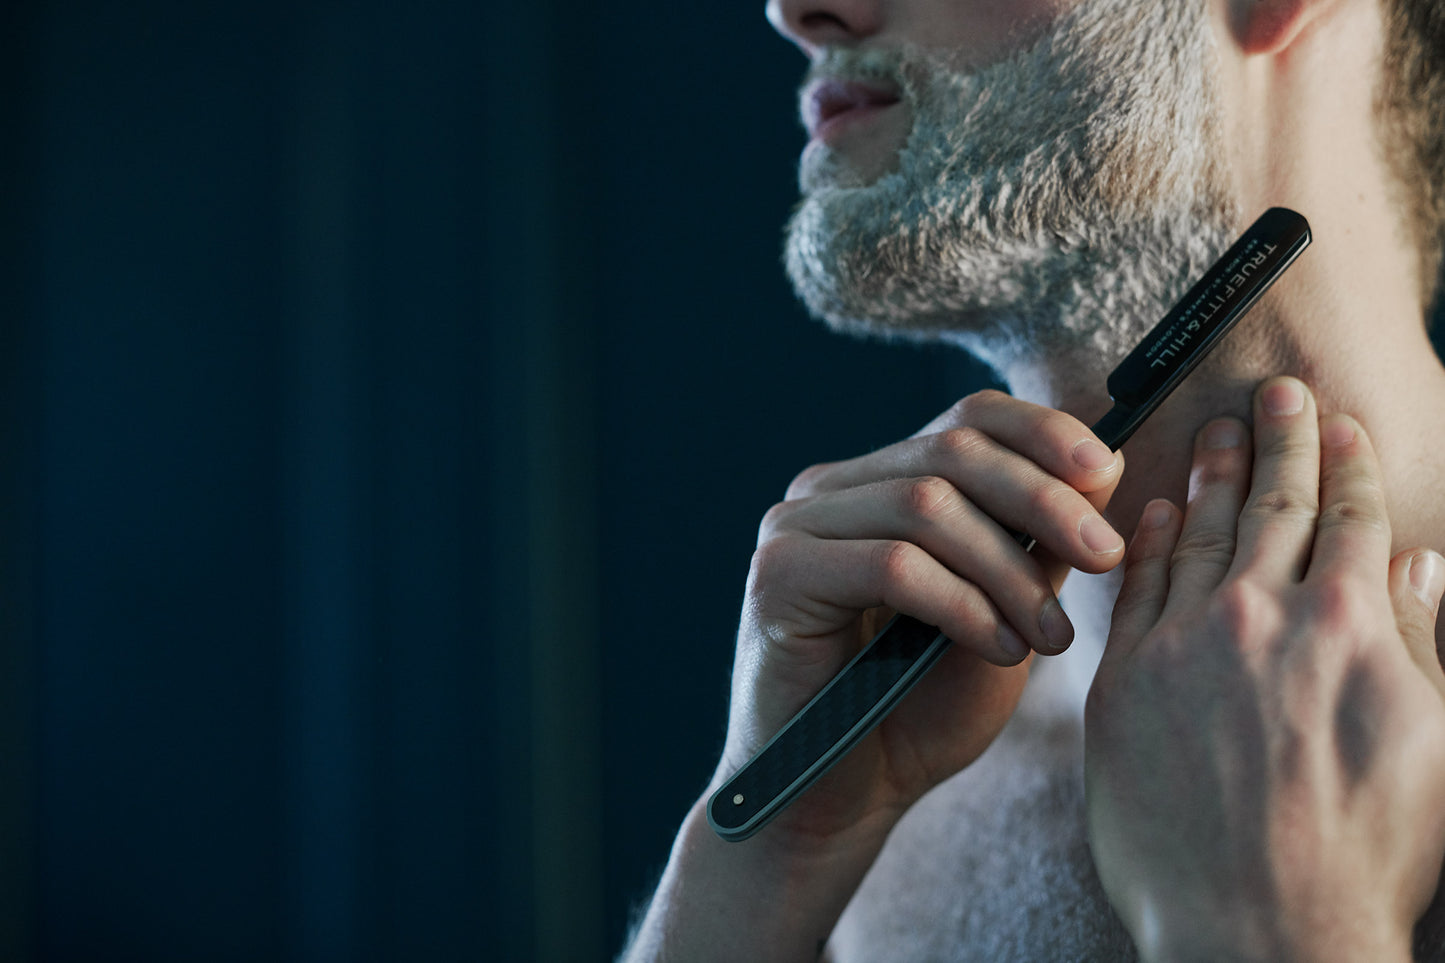 How To Shave With A Cut-Throat Razor